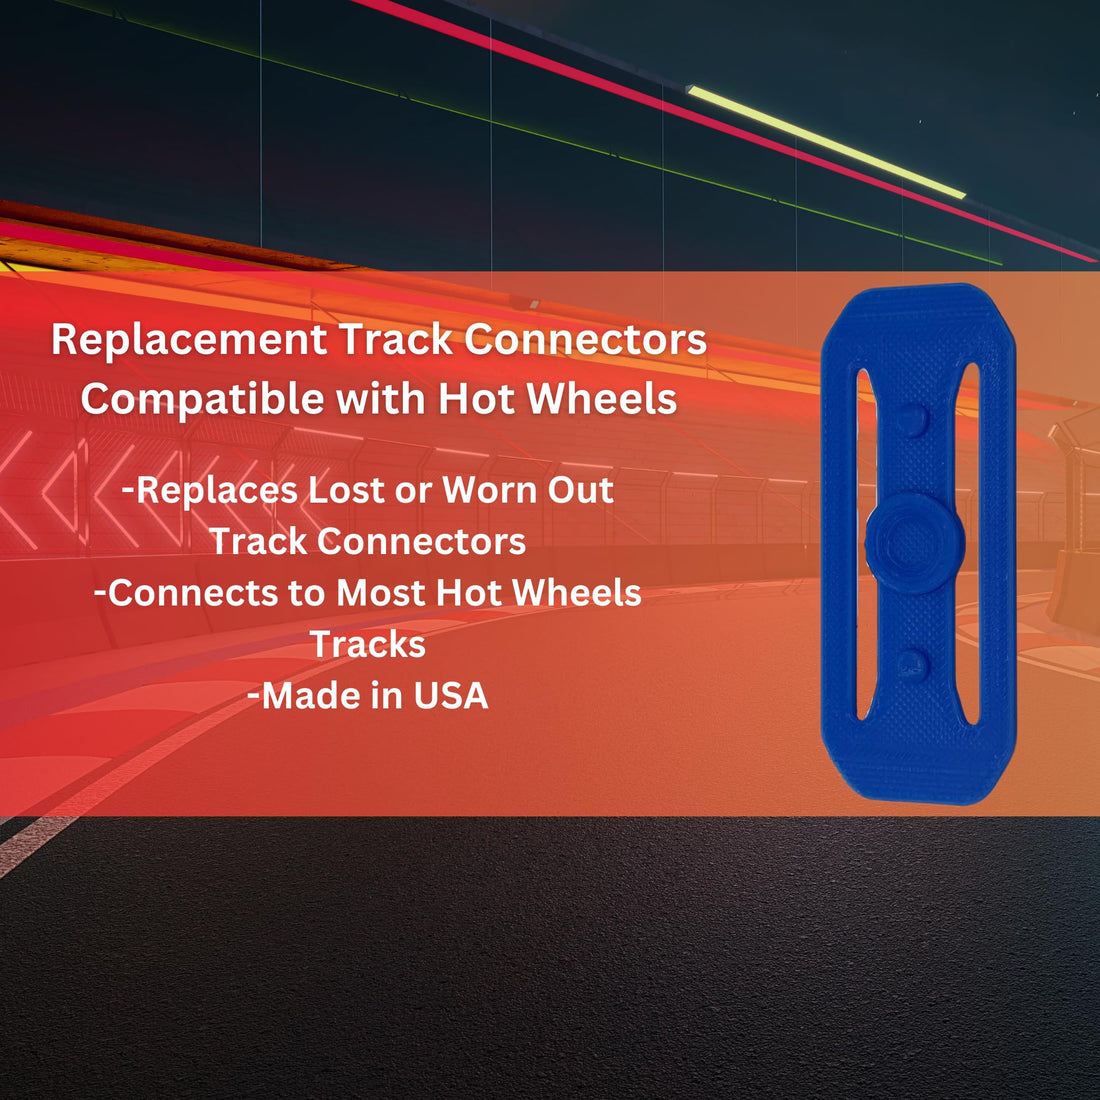 Race Track Connectors Compatible with Hot Wheels Tracks | 10 Pack Racetrack Connector Replacements | Made in USA